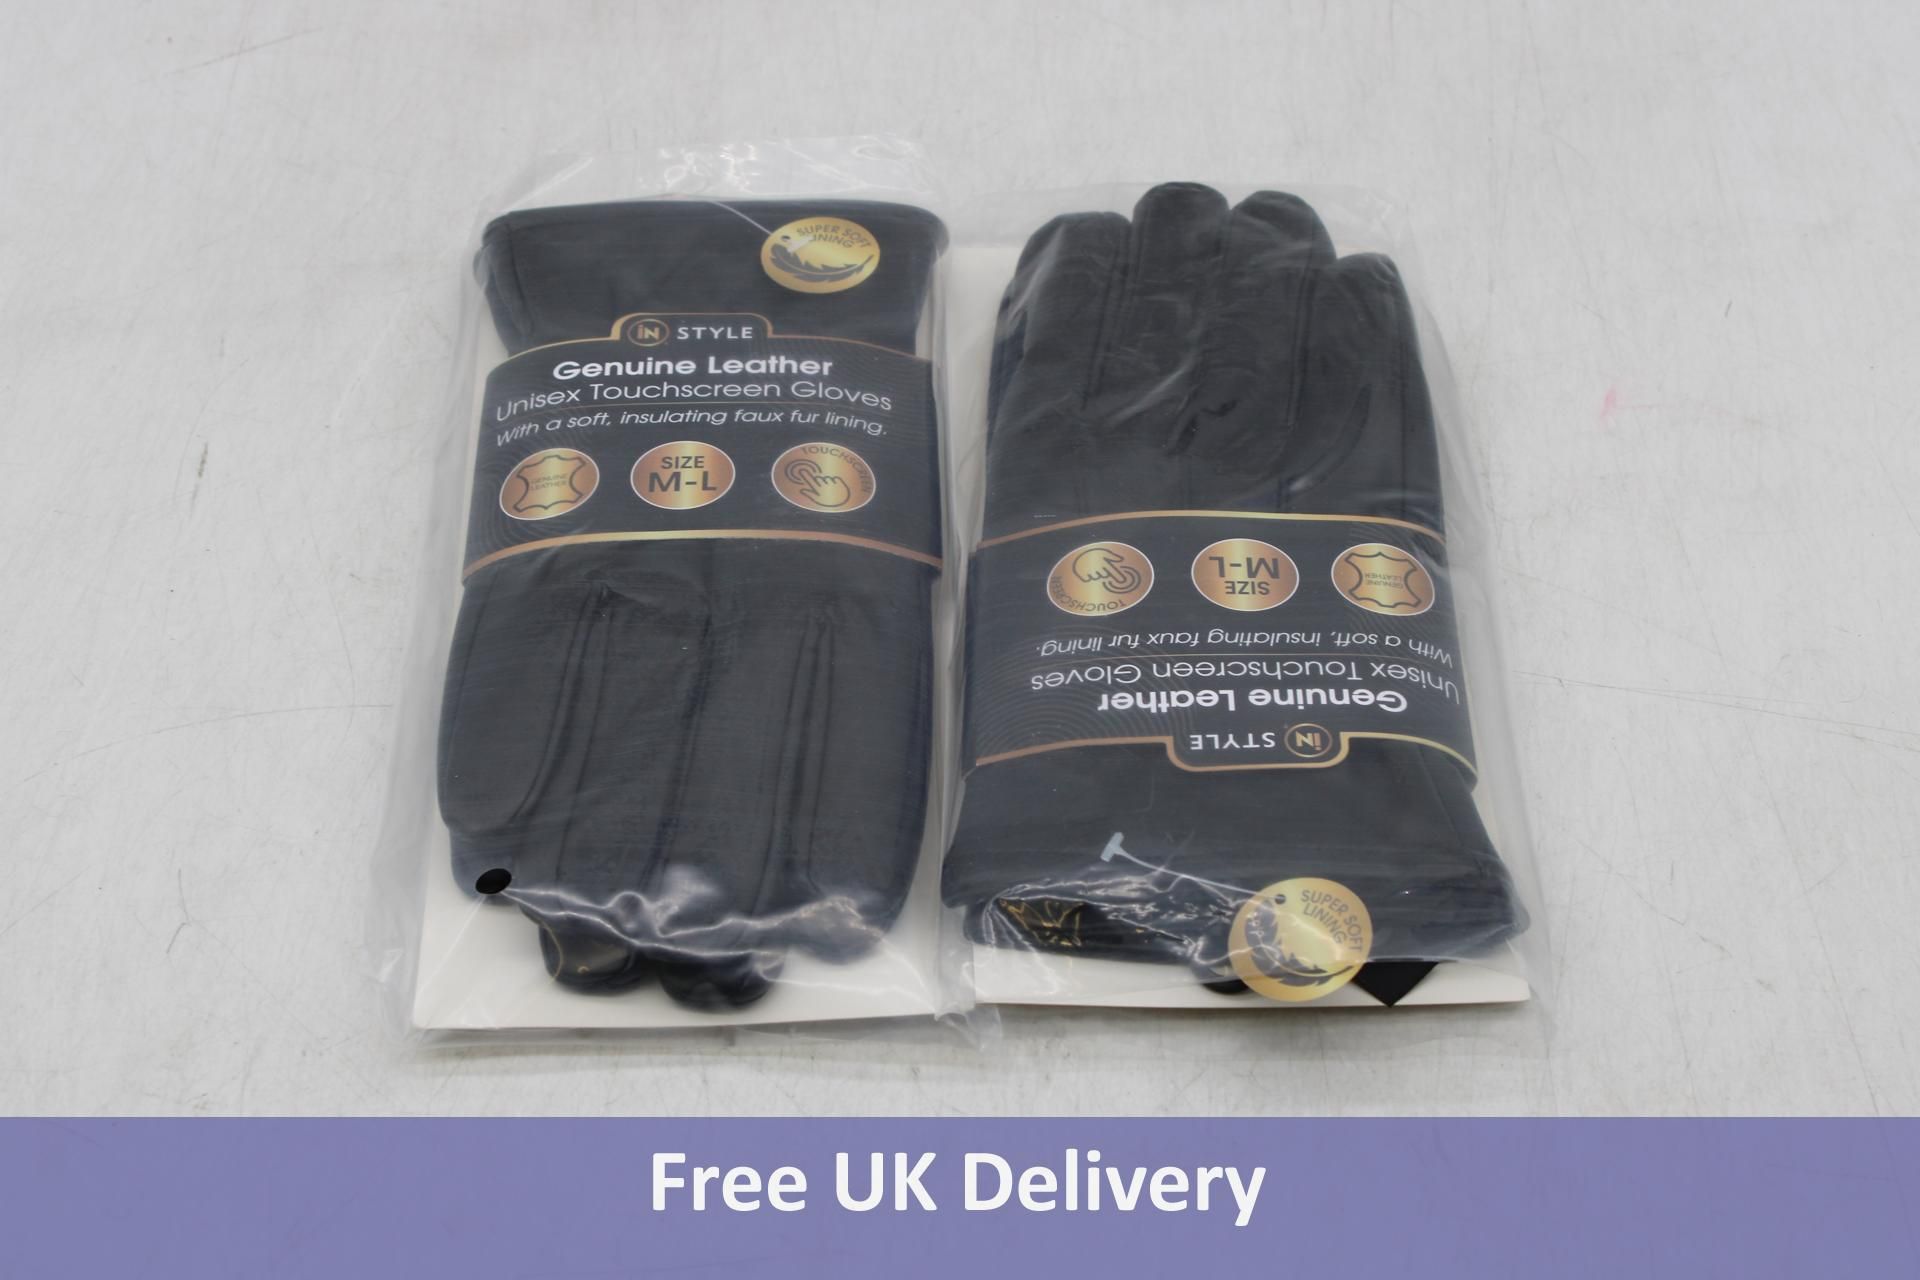 Five Pairs of iN Style Genuine Leather Unisex Touchscreen Gloves, Black, Size M-L